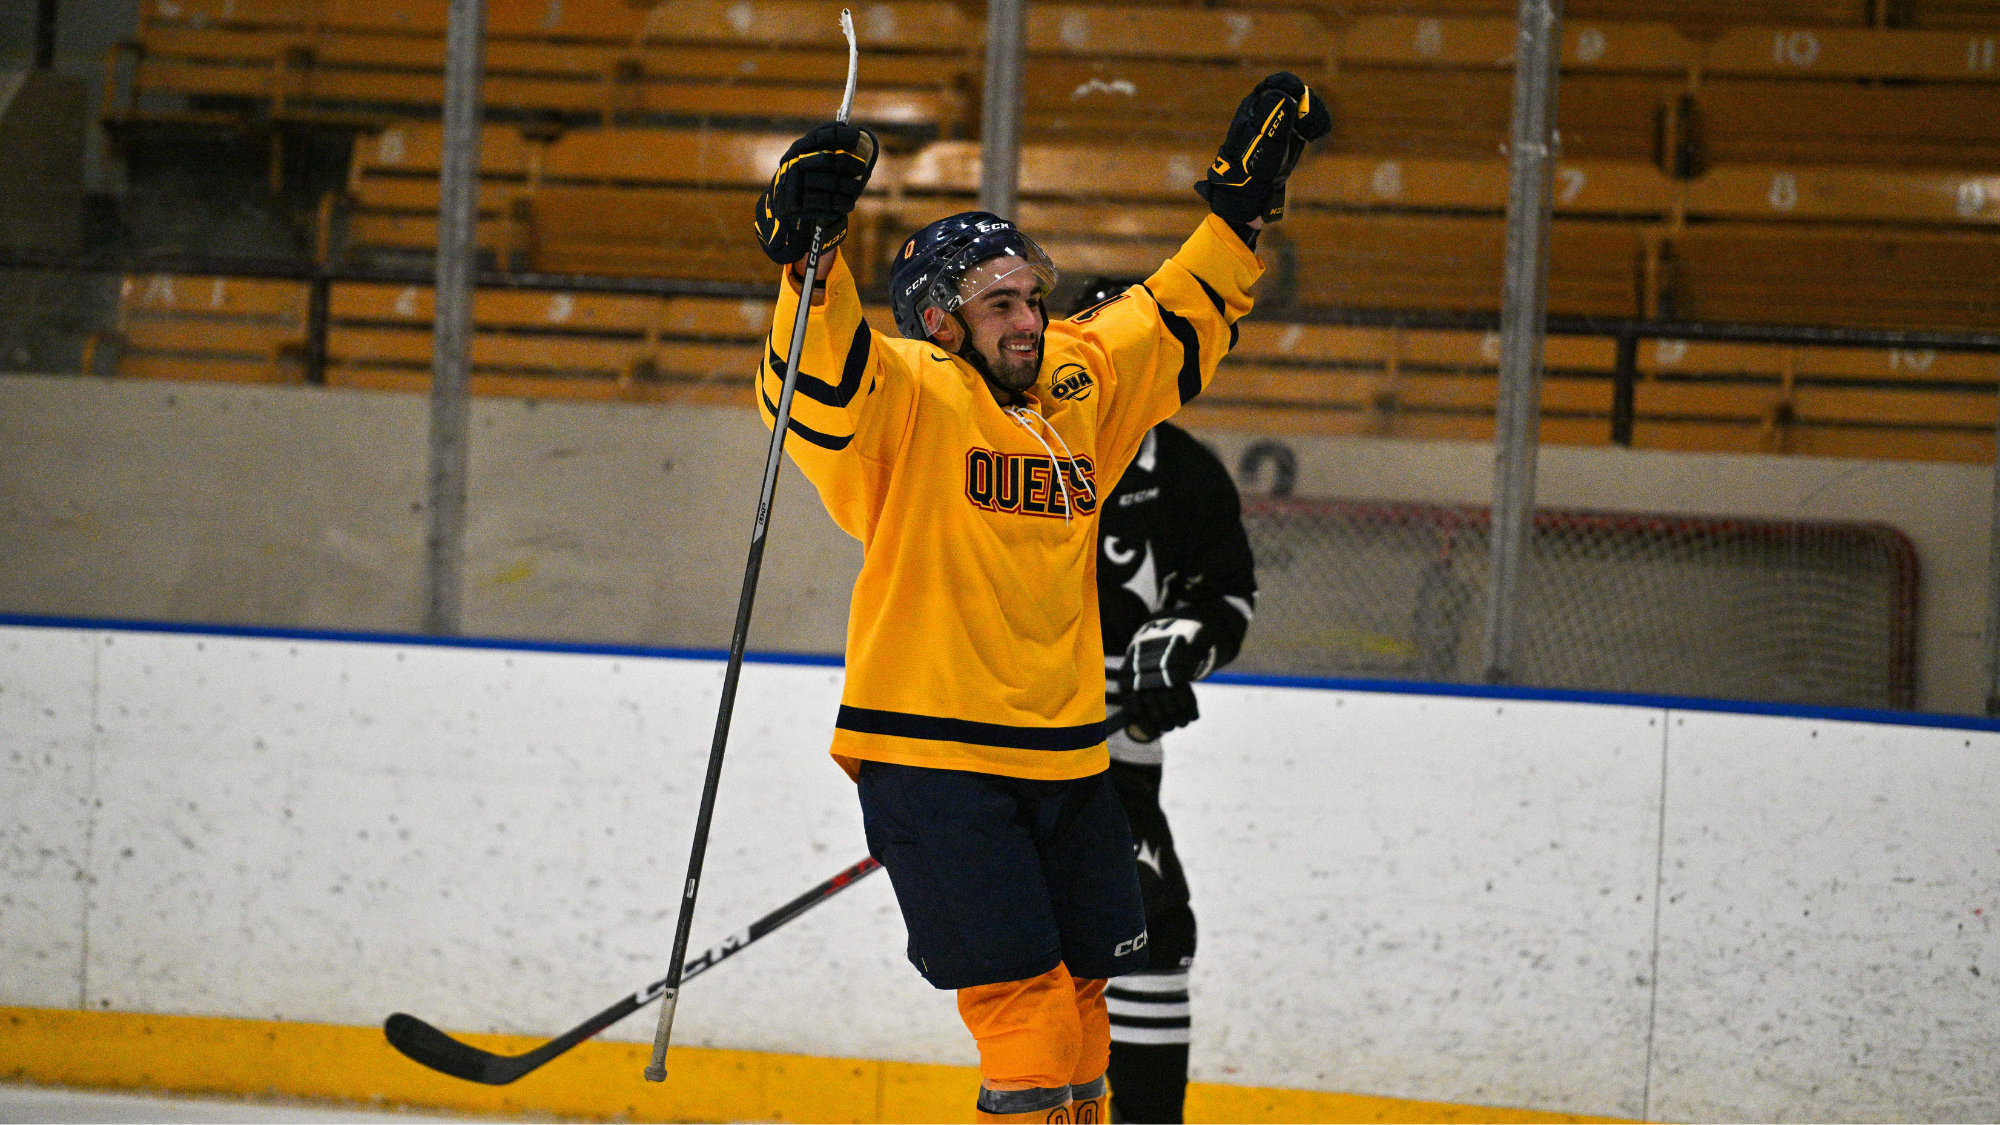 Man in yellow hockey uniform celebrating with his hands in the air